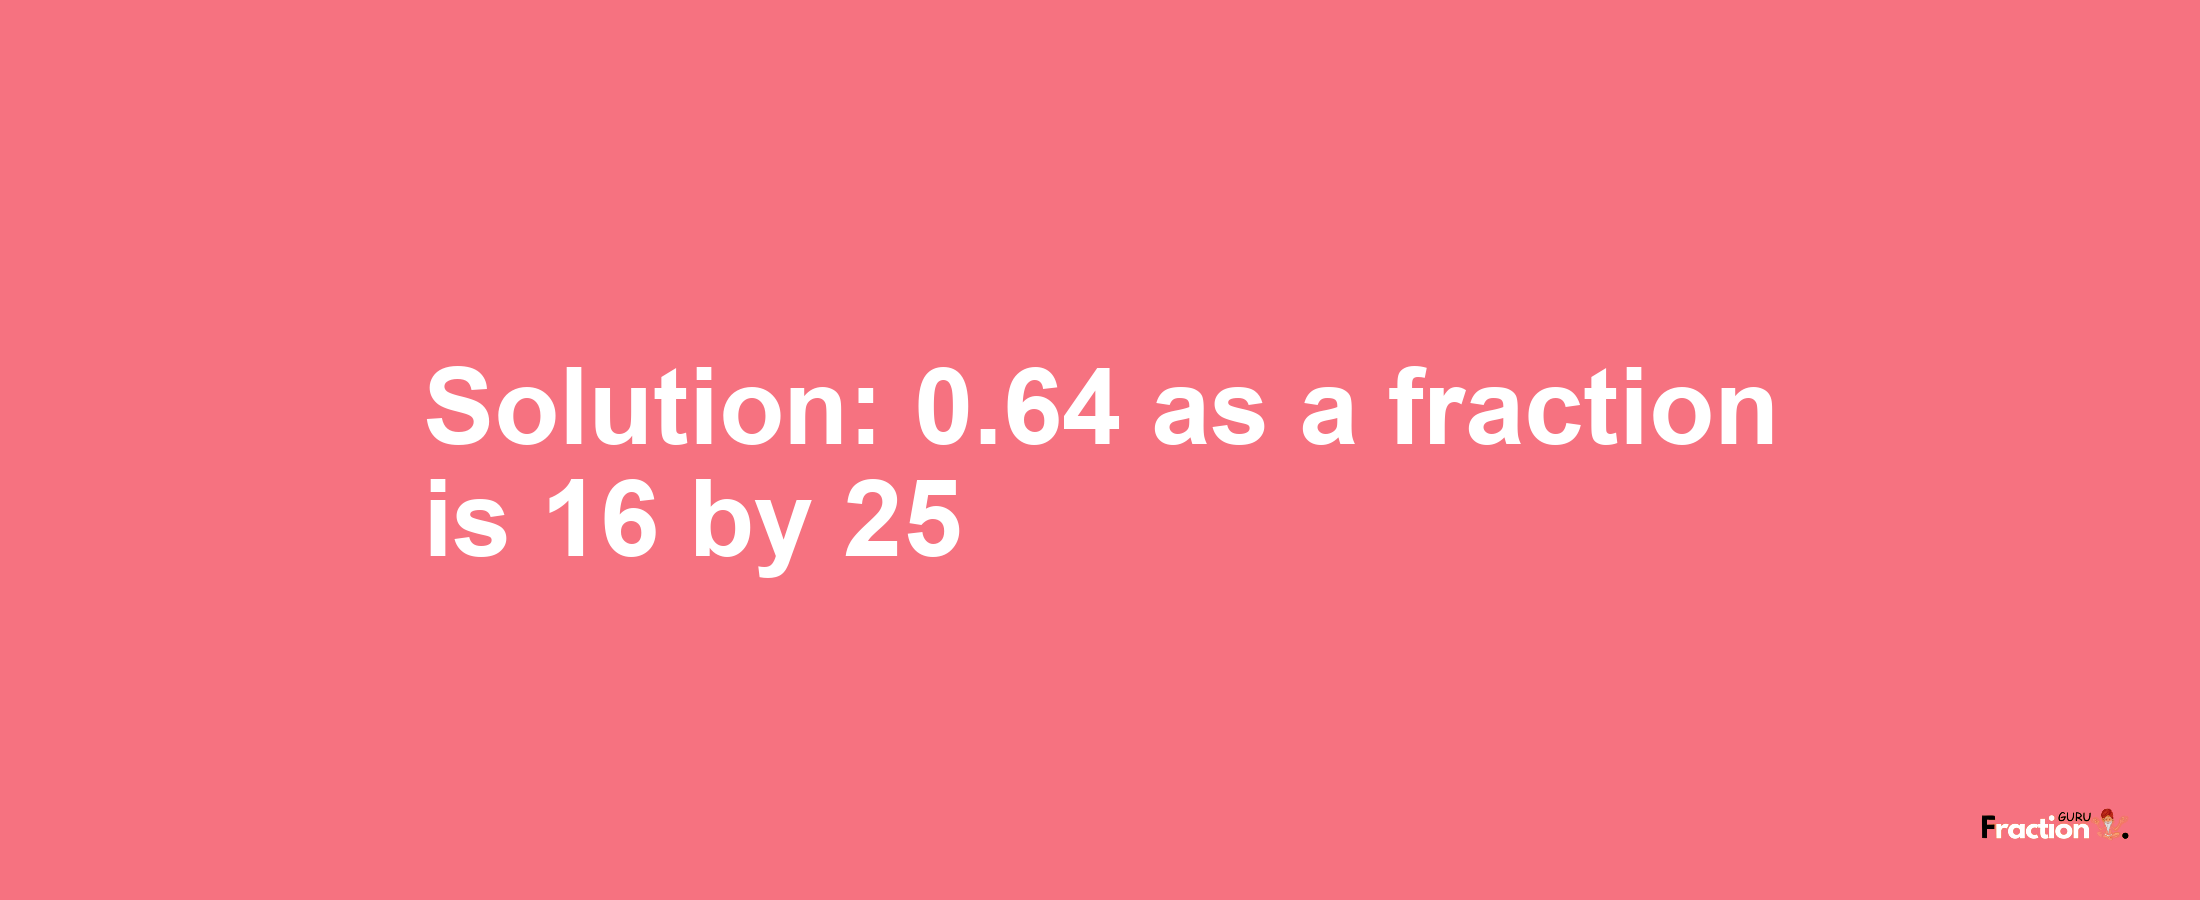 Solution:0.64 as a fraction is 16/25